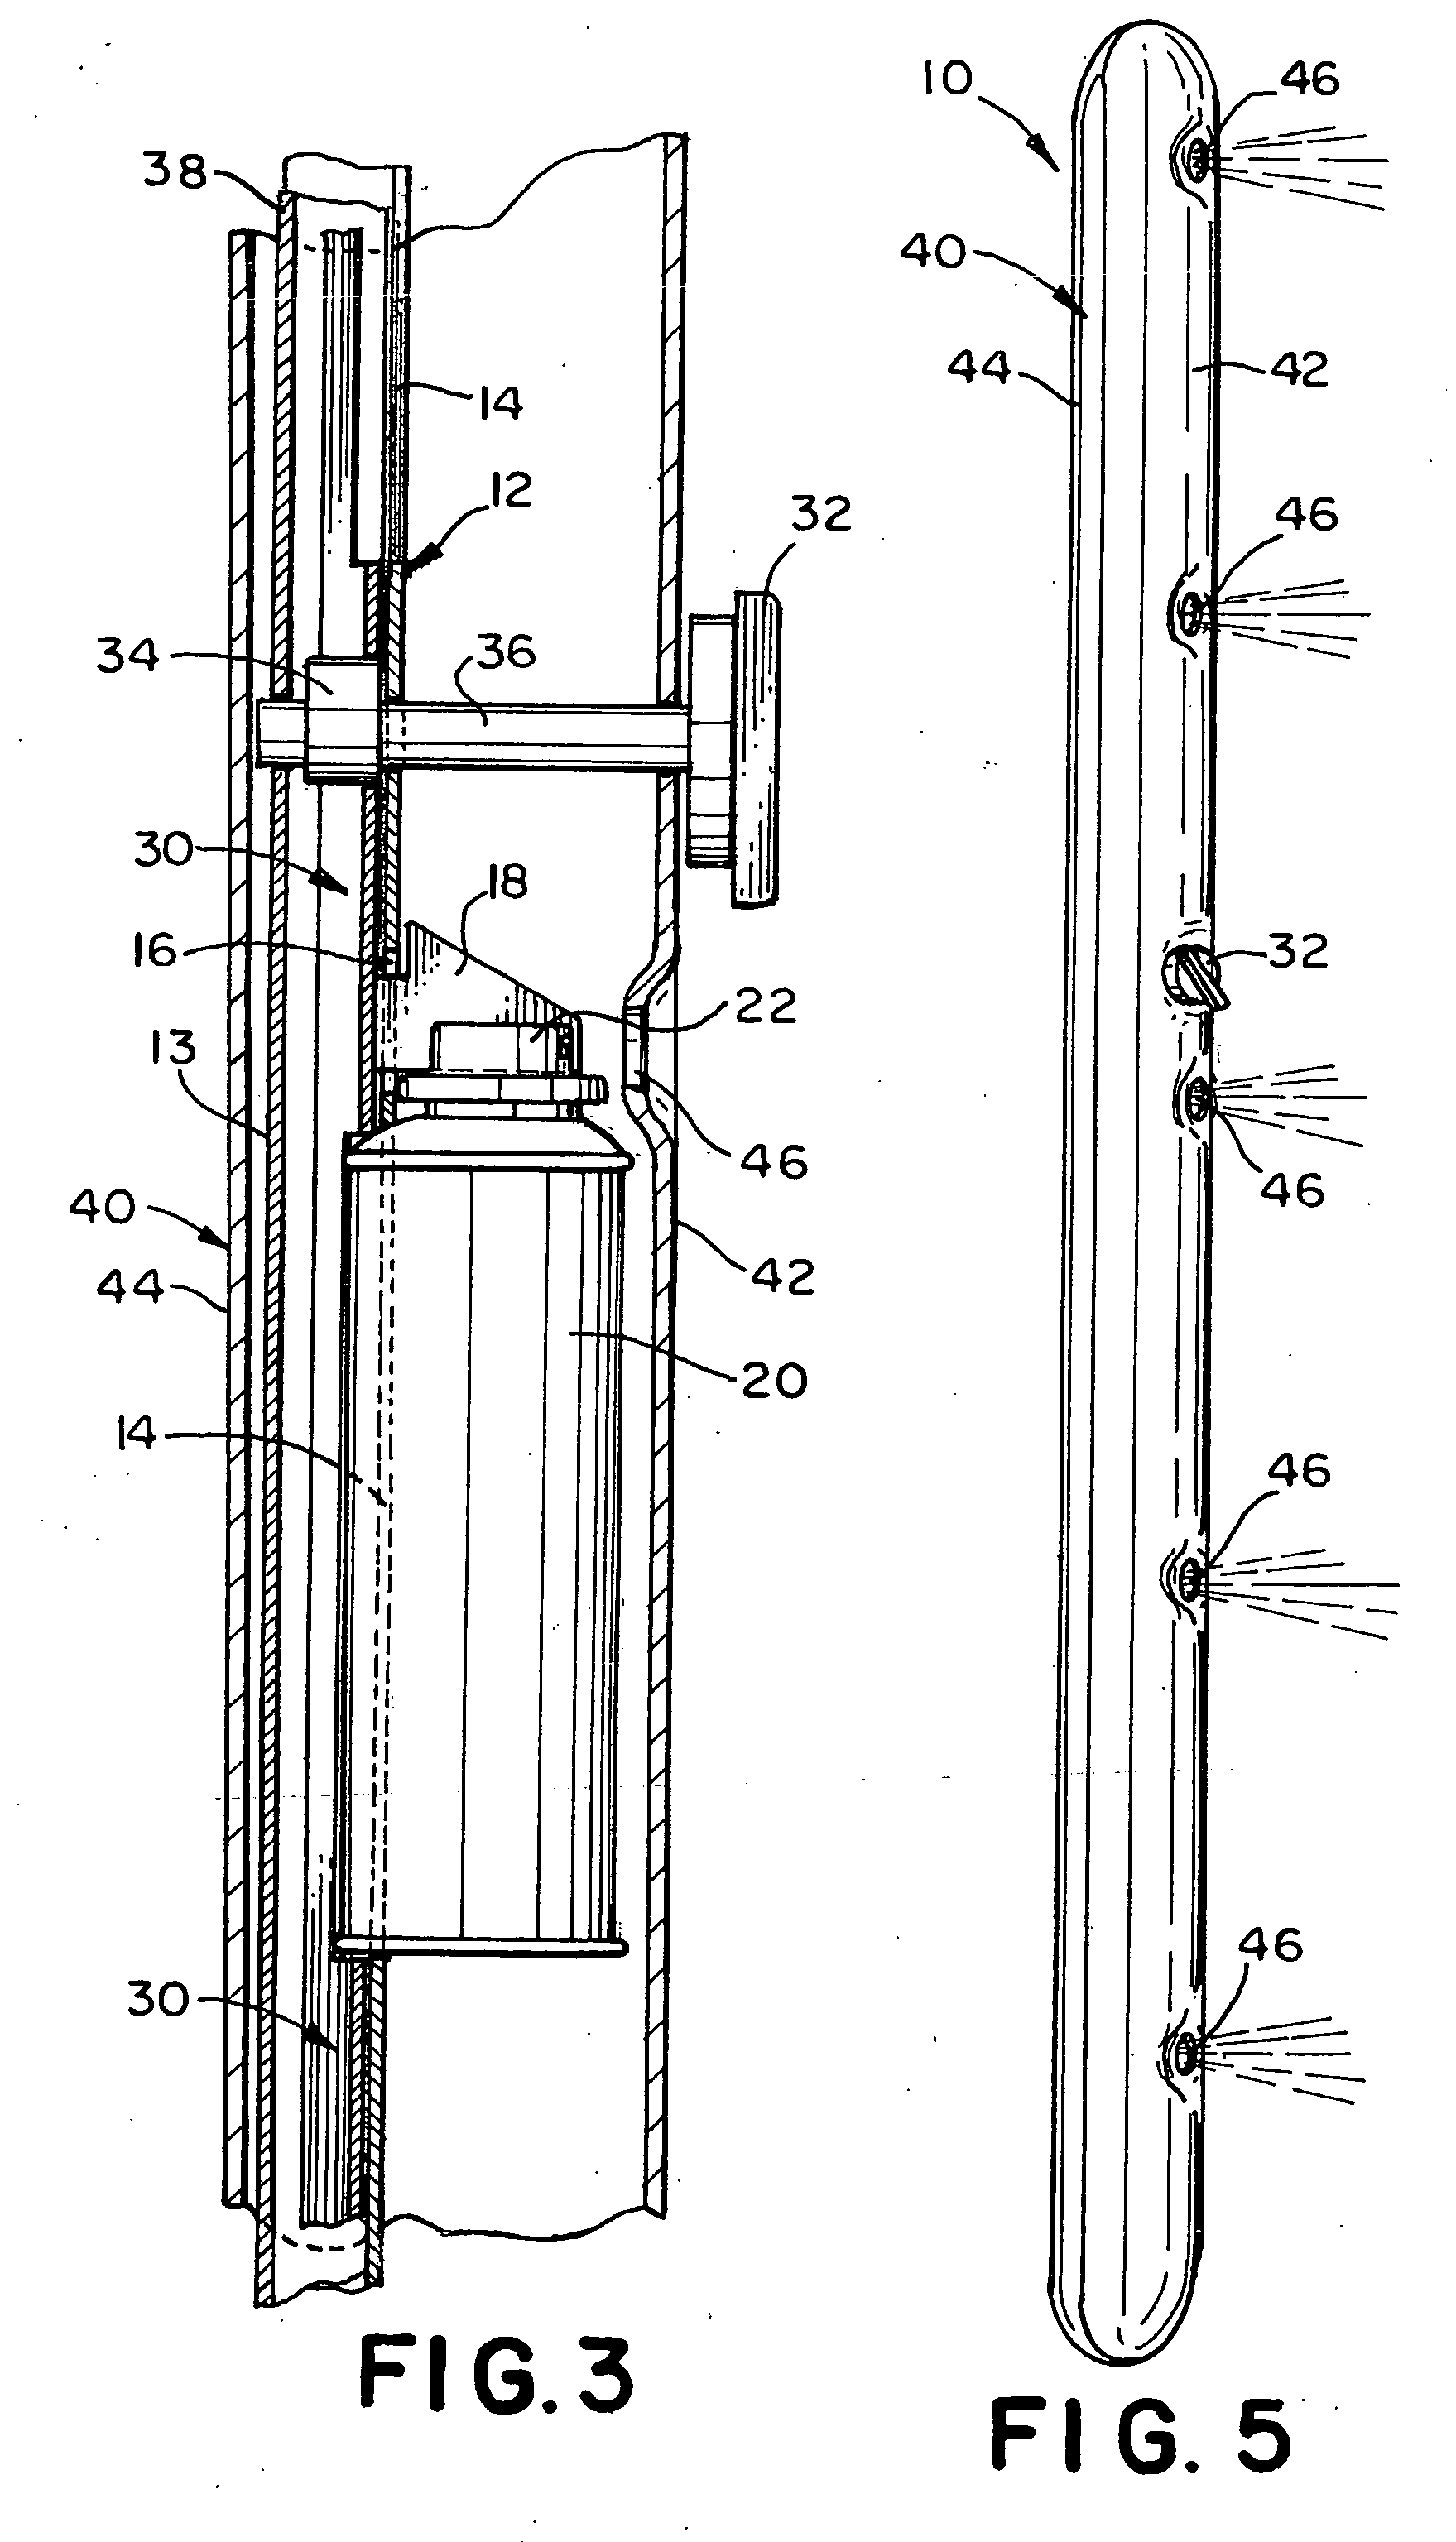 Apparatus for spray application of a sunless tanning product